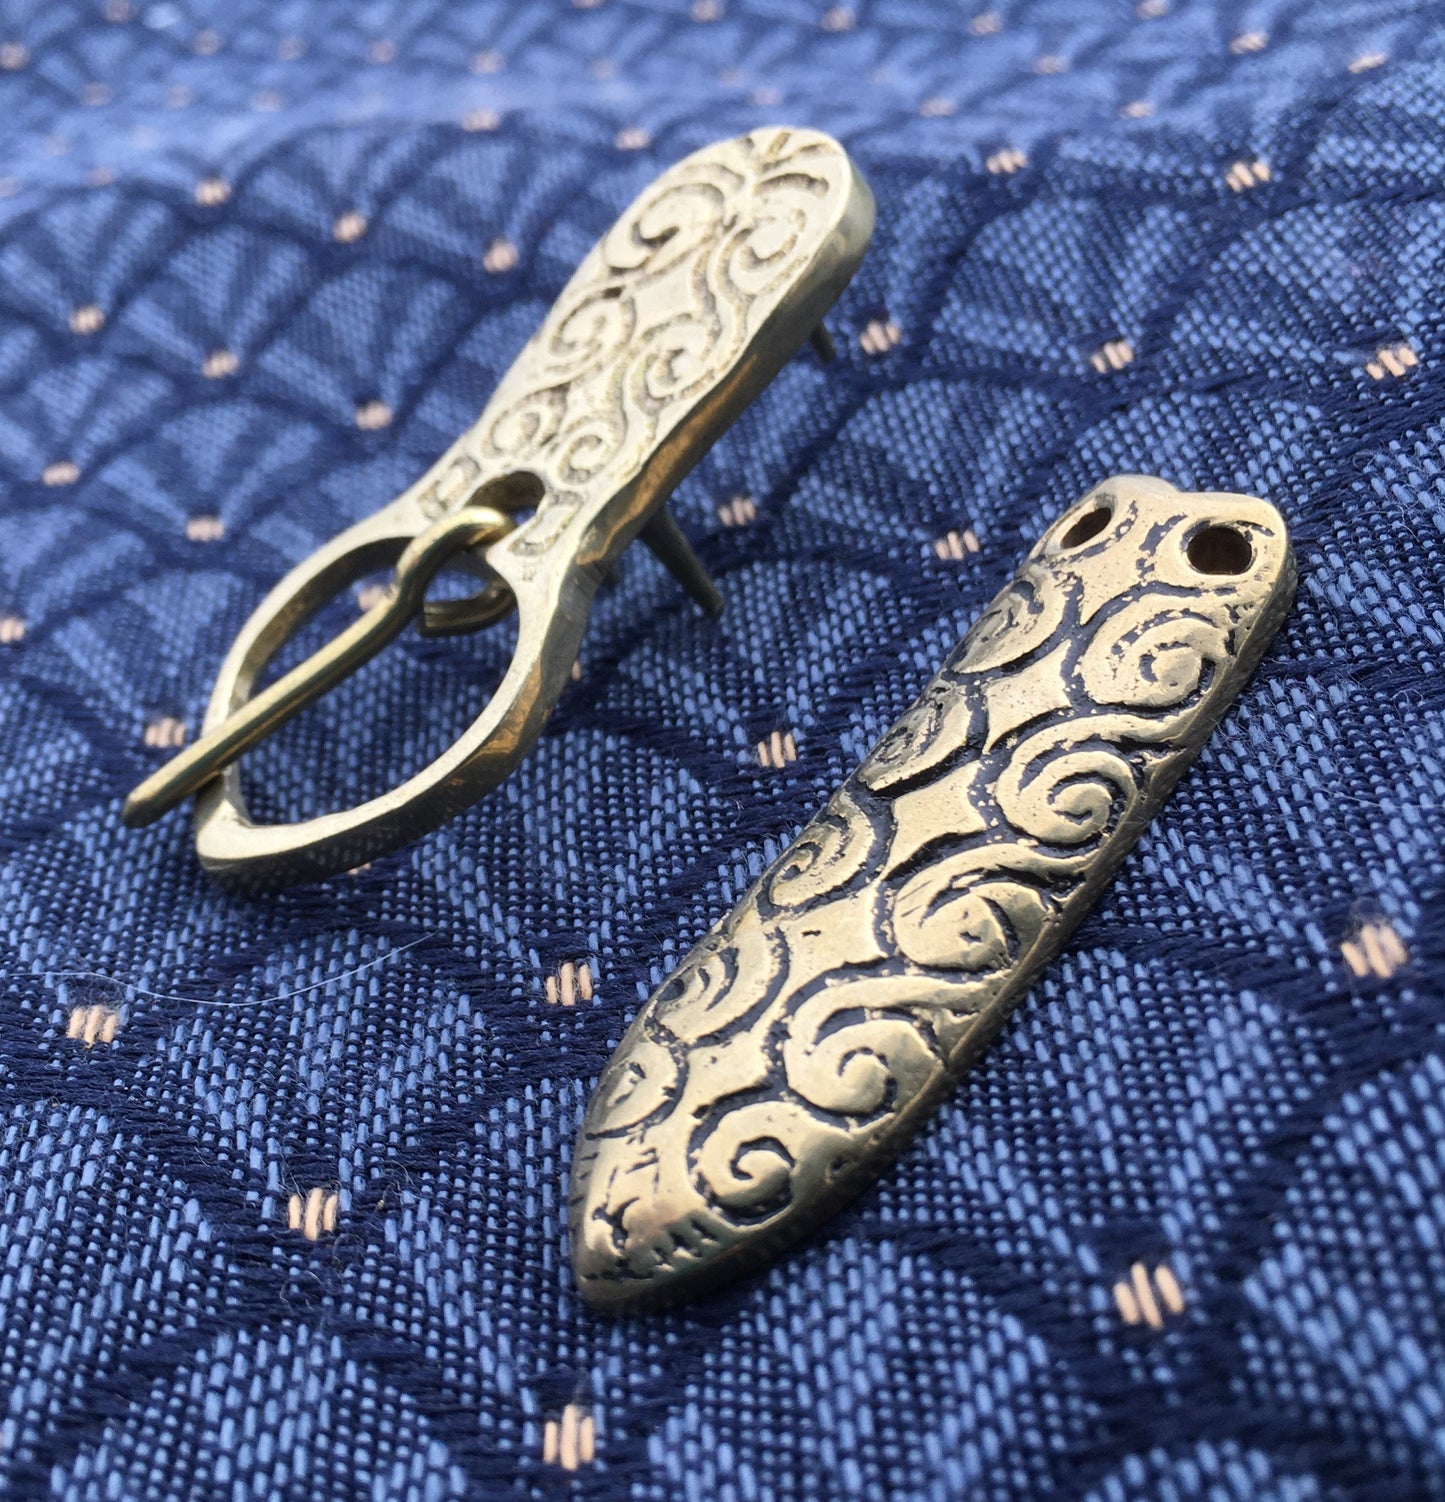 Viking buckle and strap end with a swirling pattern